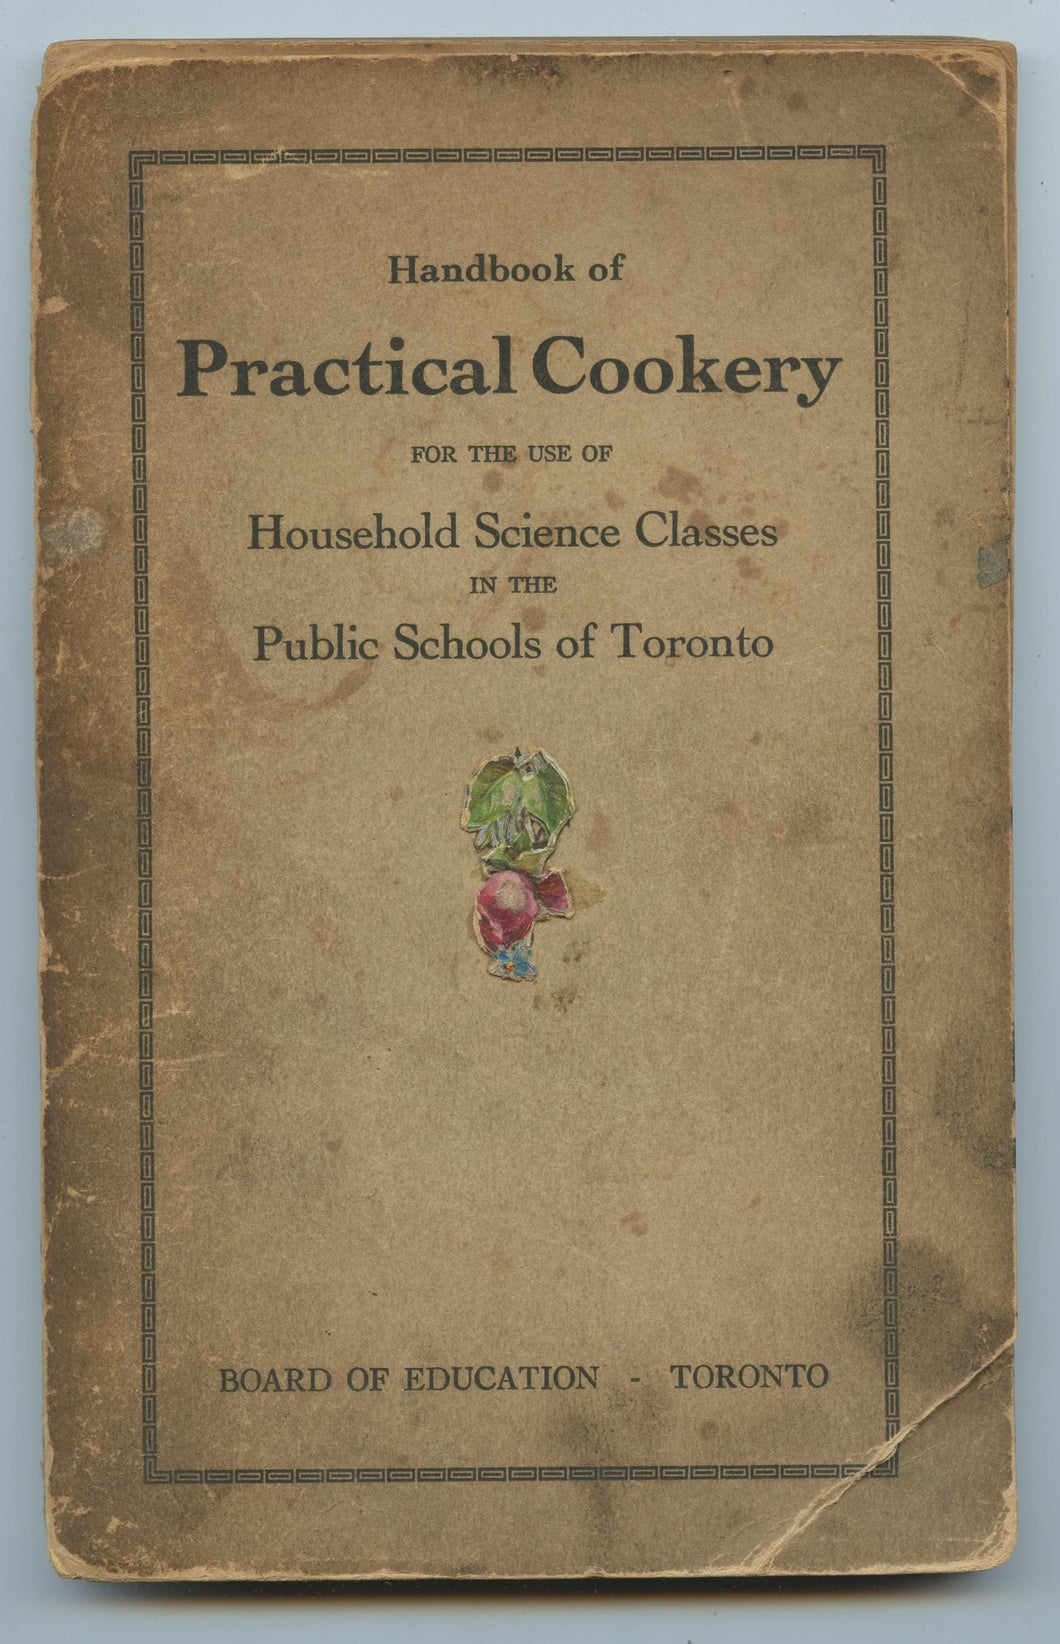 Handbook of Practical Cookery for the Use of Household Science Classes in the Public Schools of Toronto